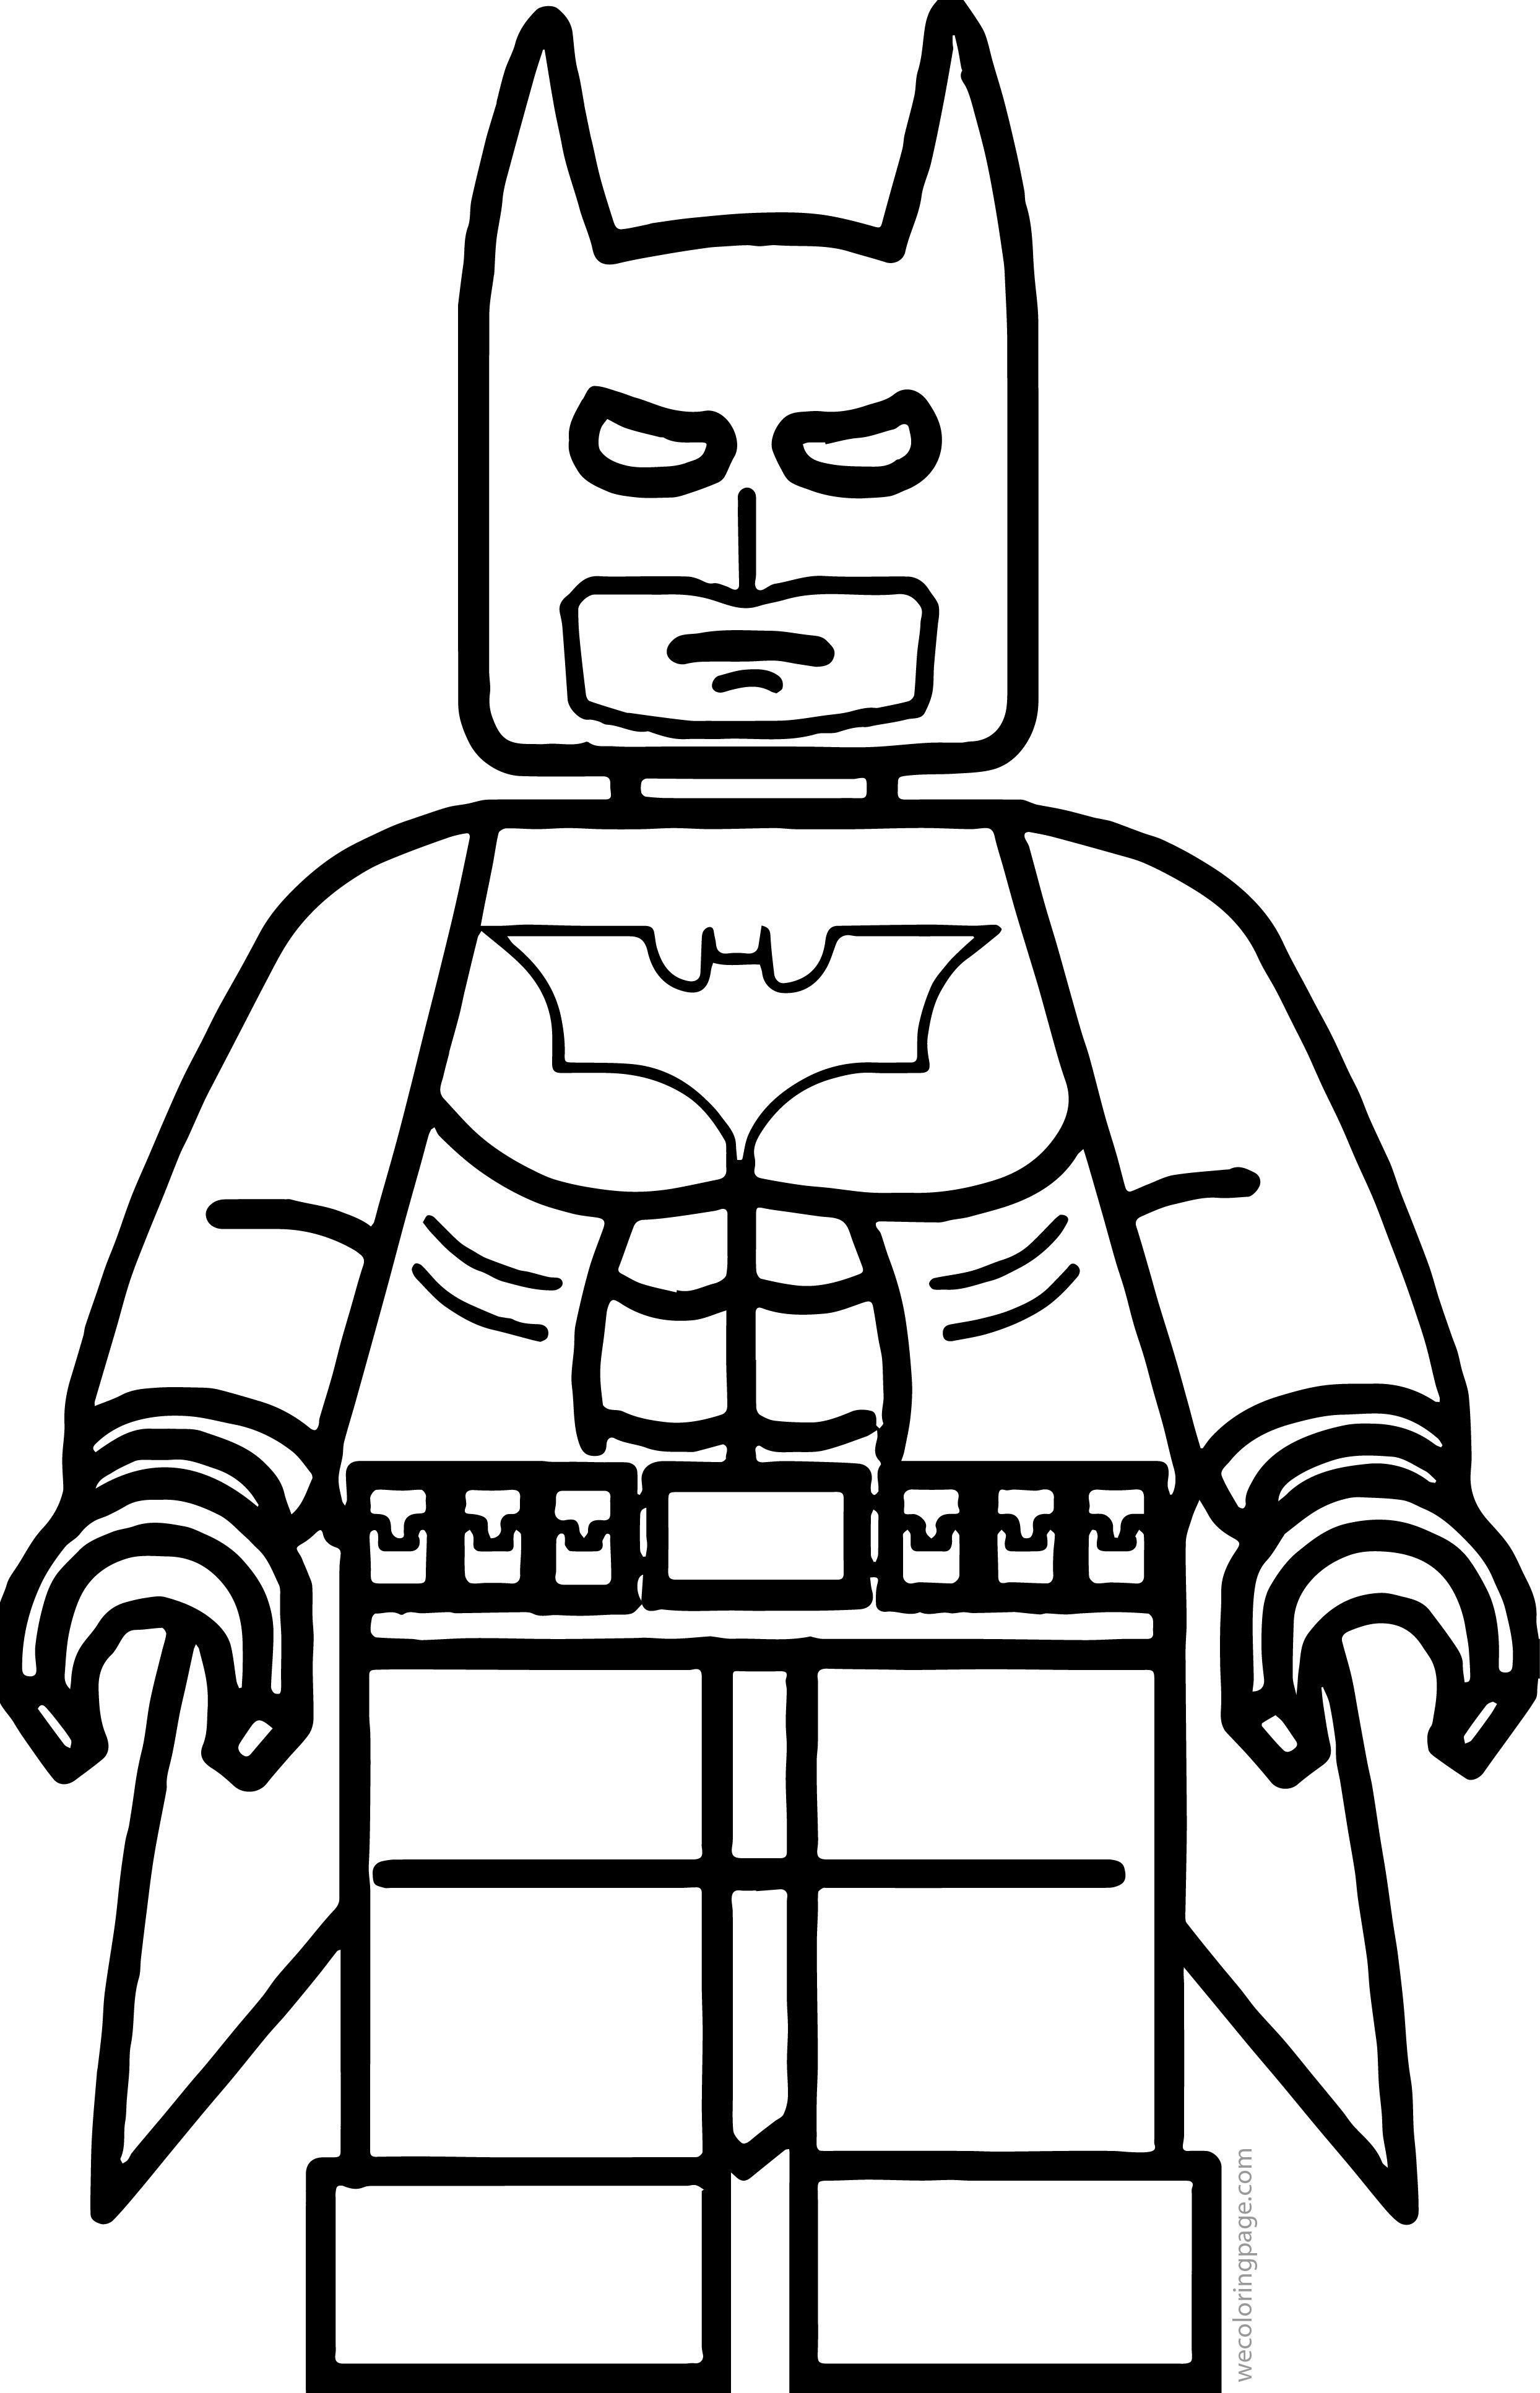 Superman Christmas Coloring Pages Images Of Superman Christmas Coloring Pages Sabadaphnecottage